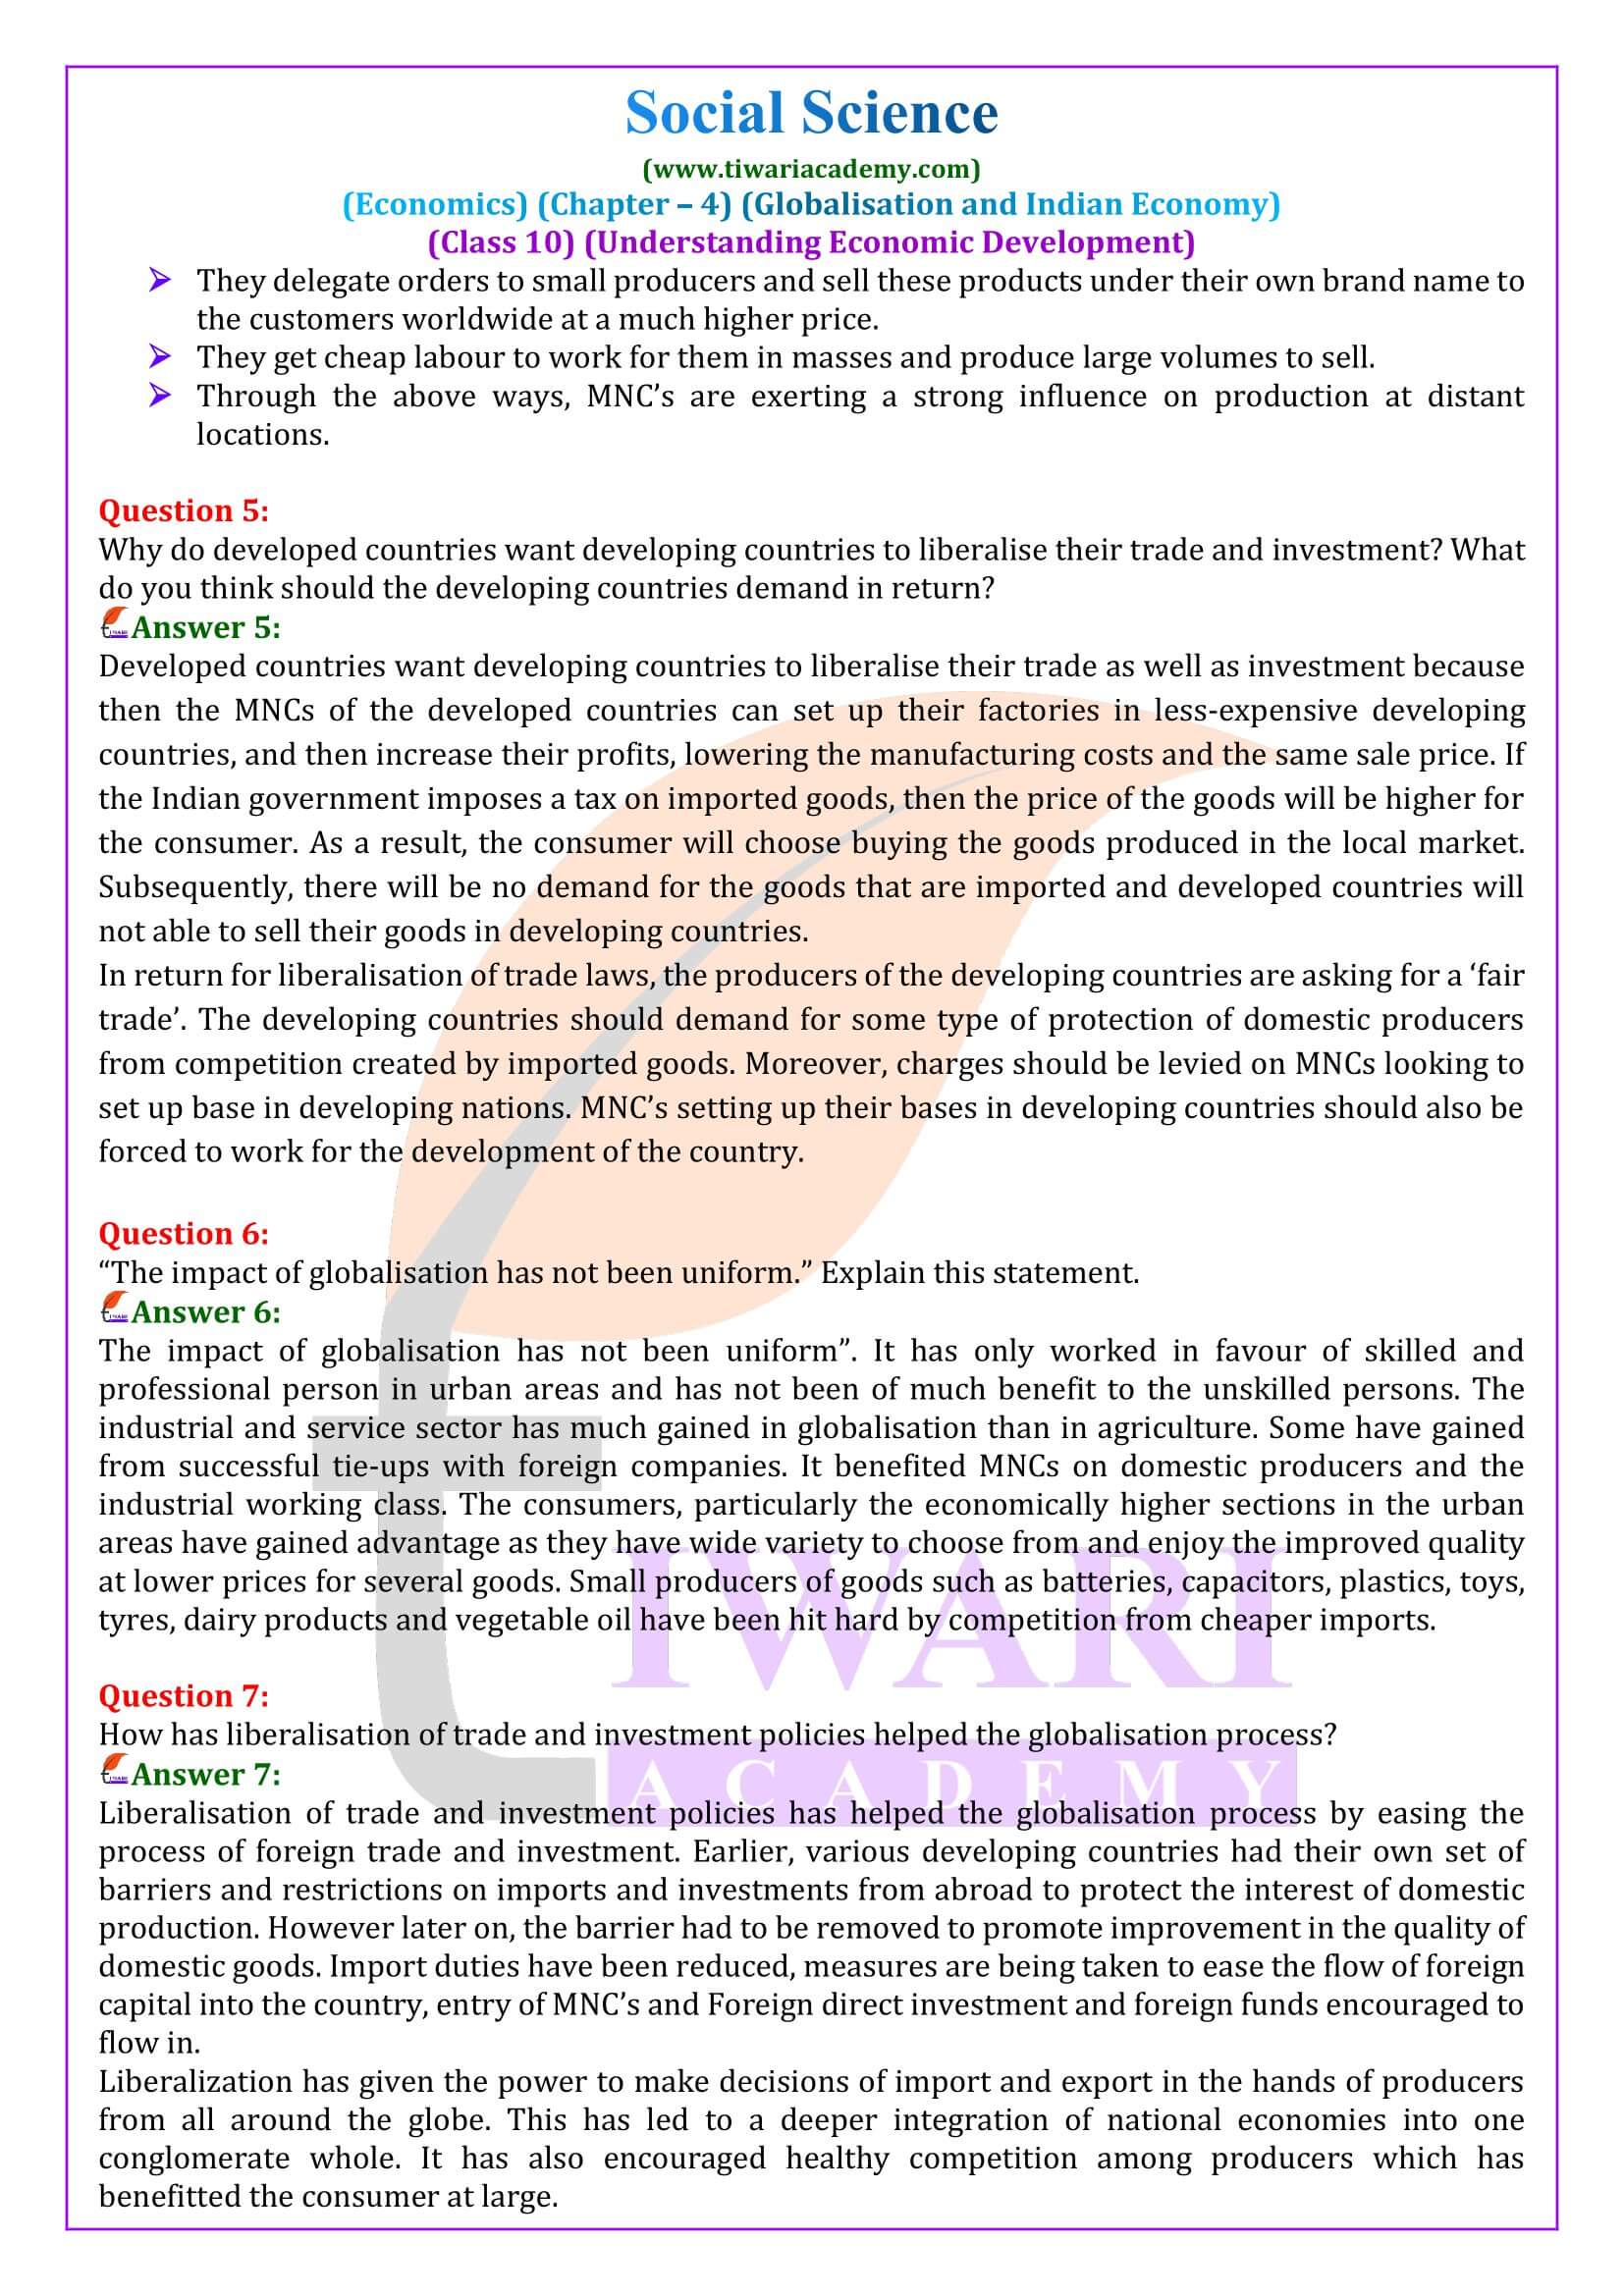 NCERT Solutions for Class 10 Economics Chapter 4